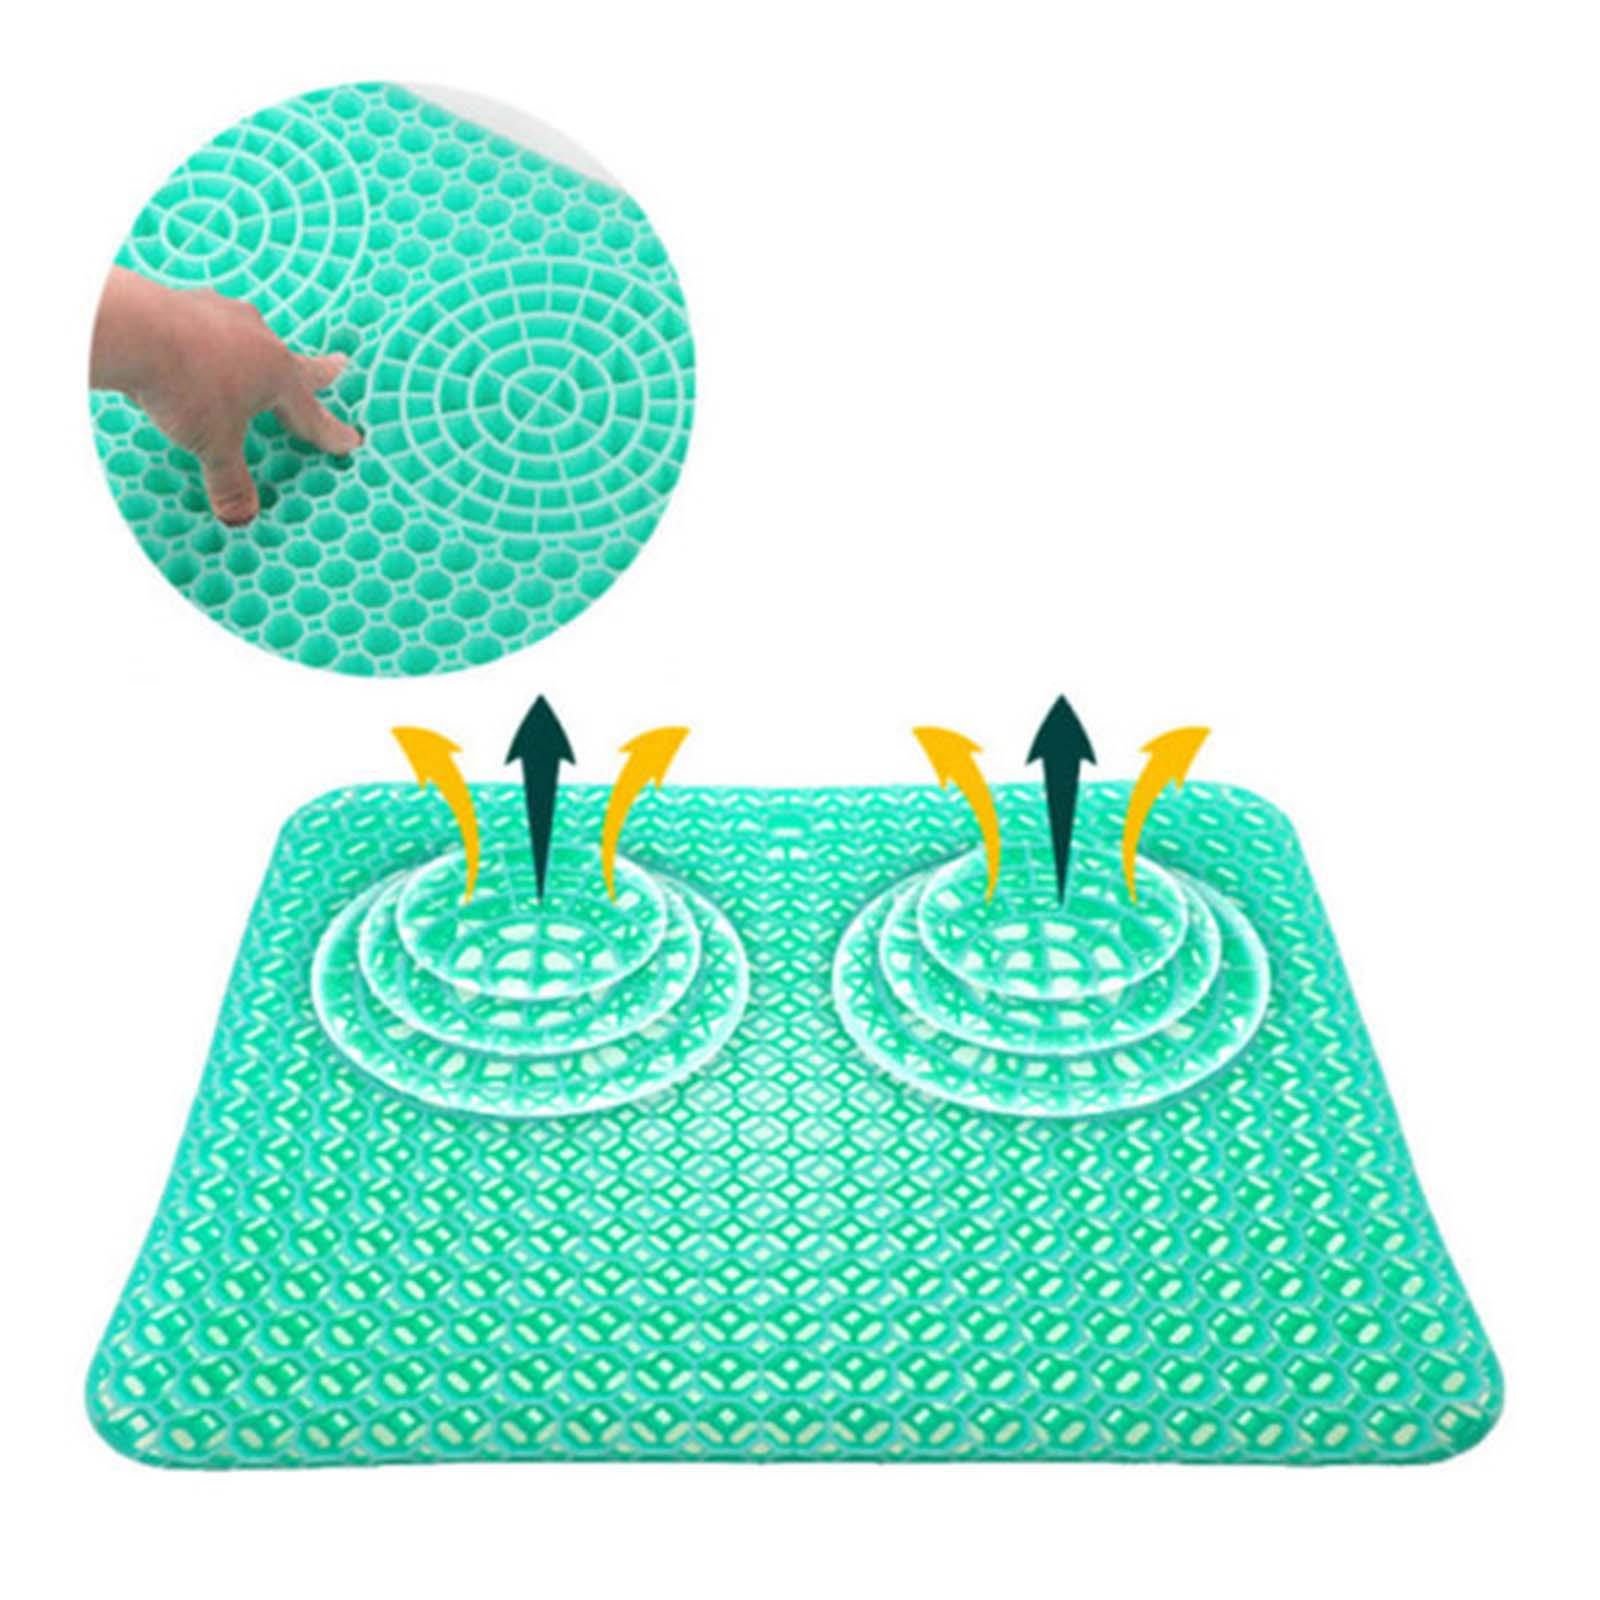 Gel Seat Cushion Comfortable Honeycomb Gel Cushion for Home Traveling CushionWithout Cover